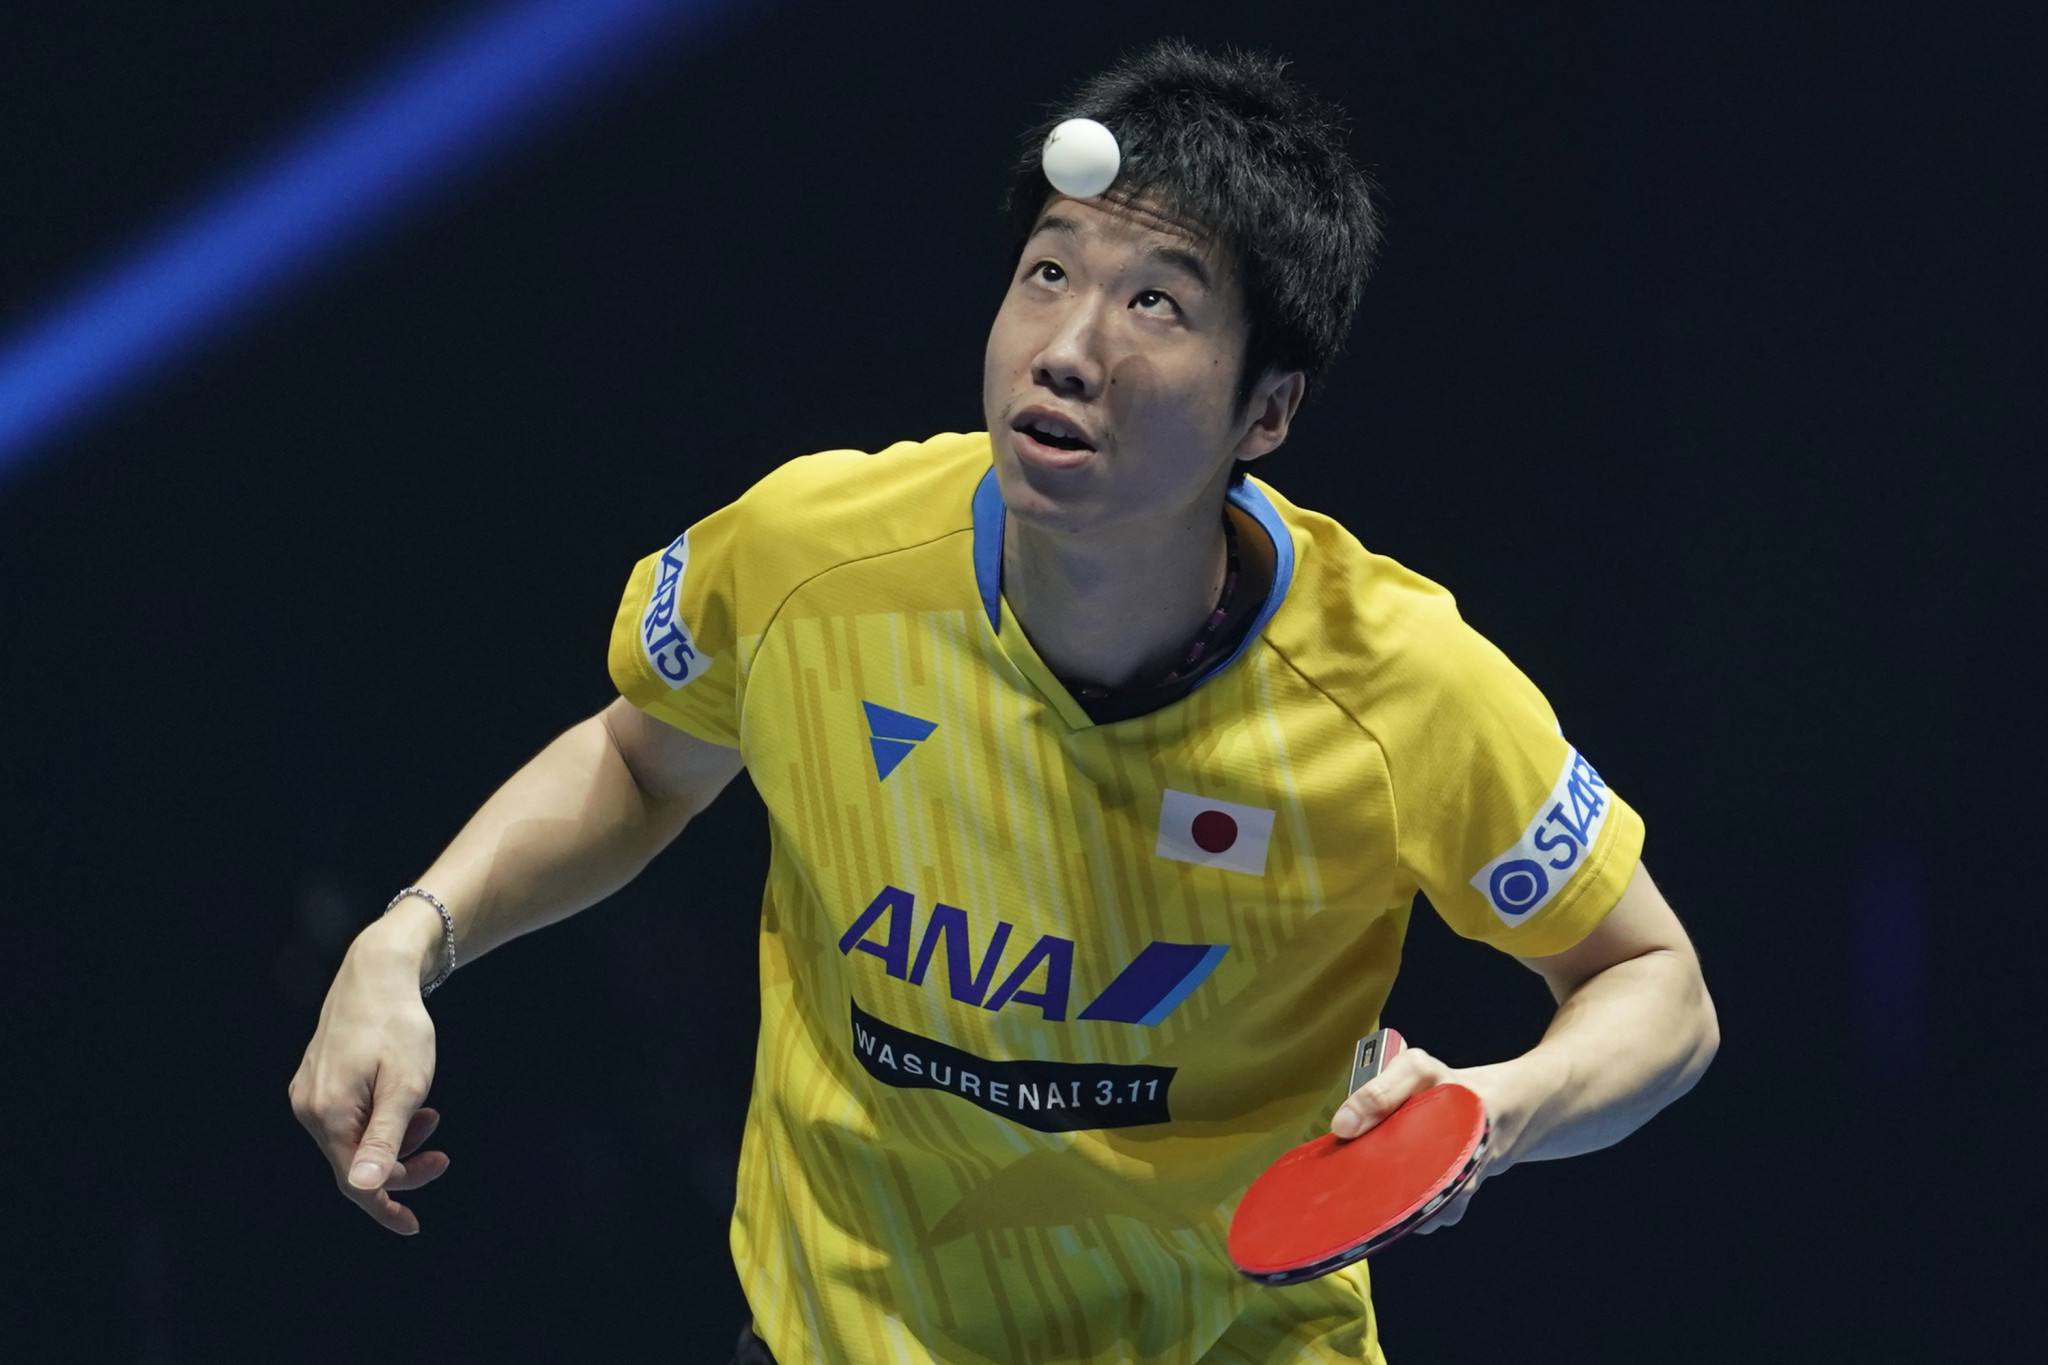 Jun Mizutani of Japan will compete at his fourth Olympic Games after securing a place at Tokyo 2020 ©Getty Images